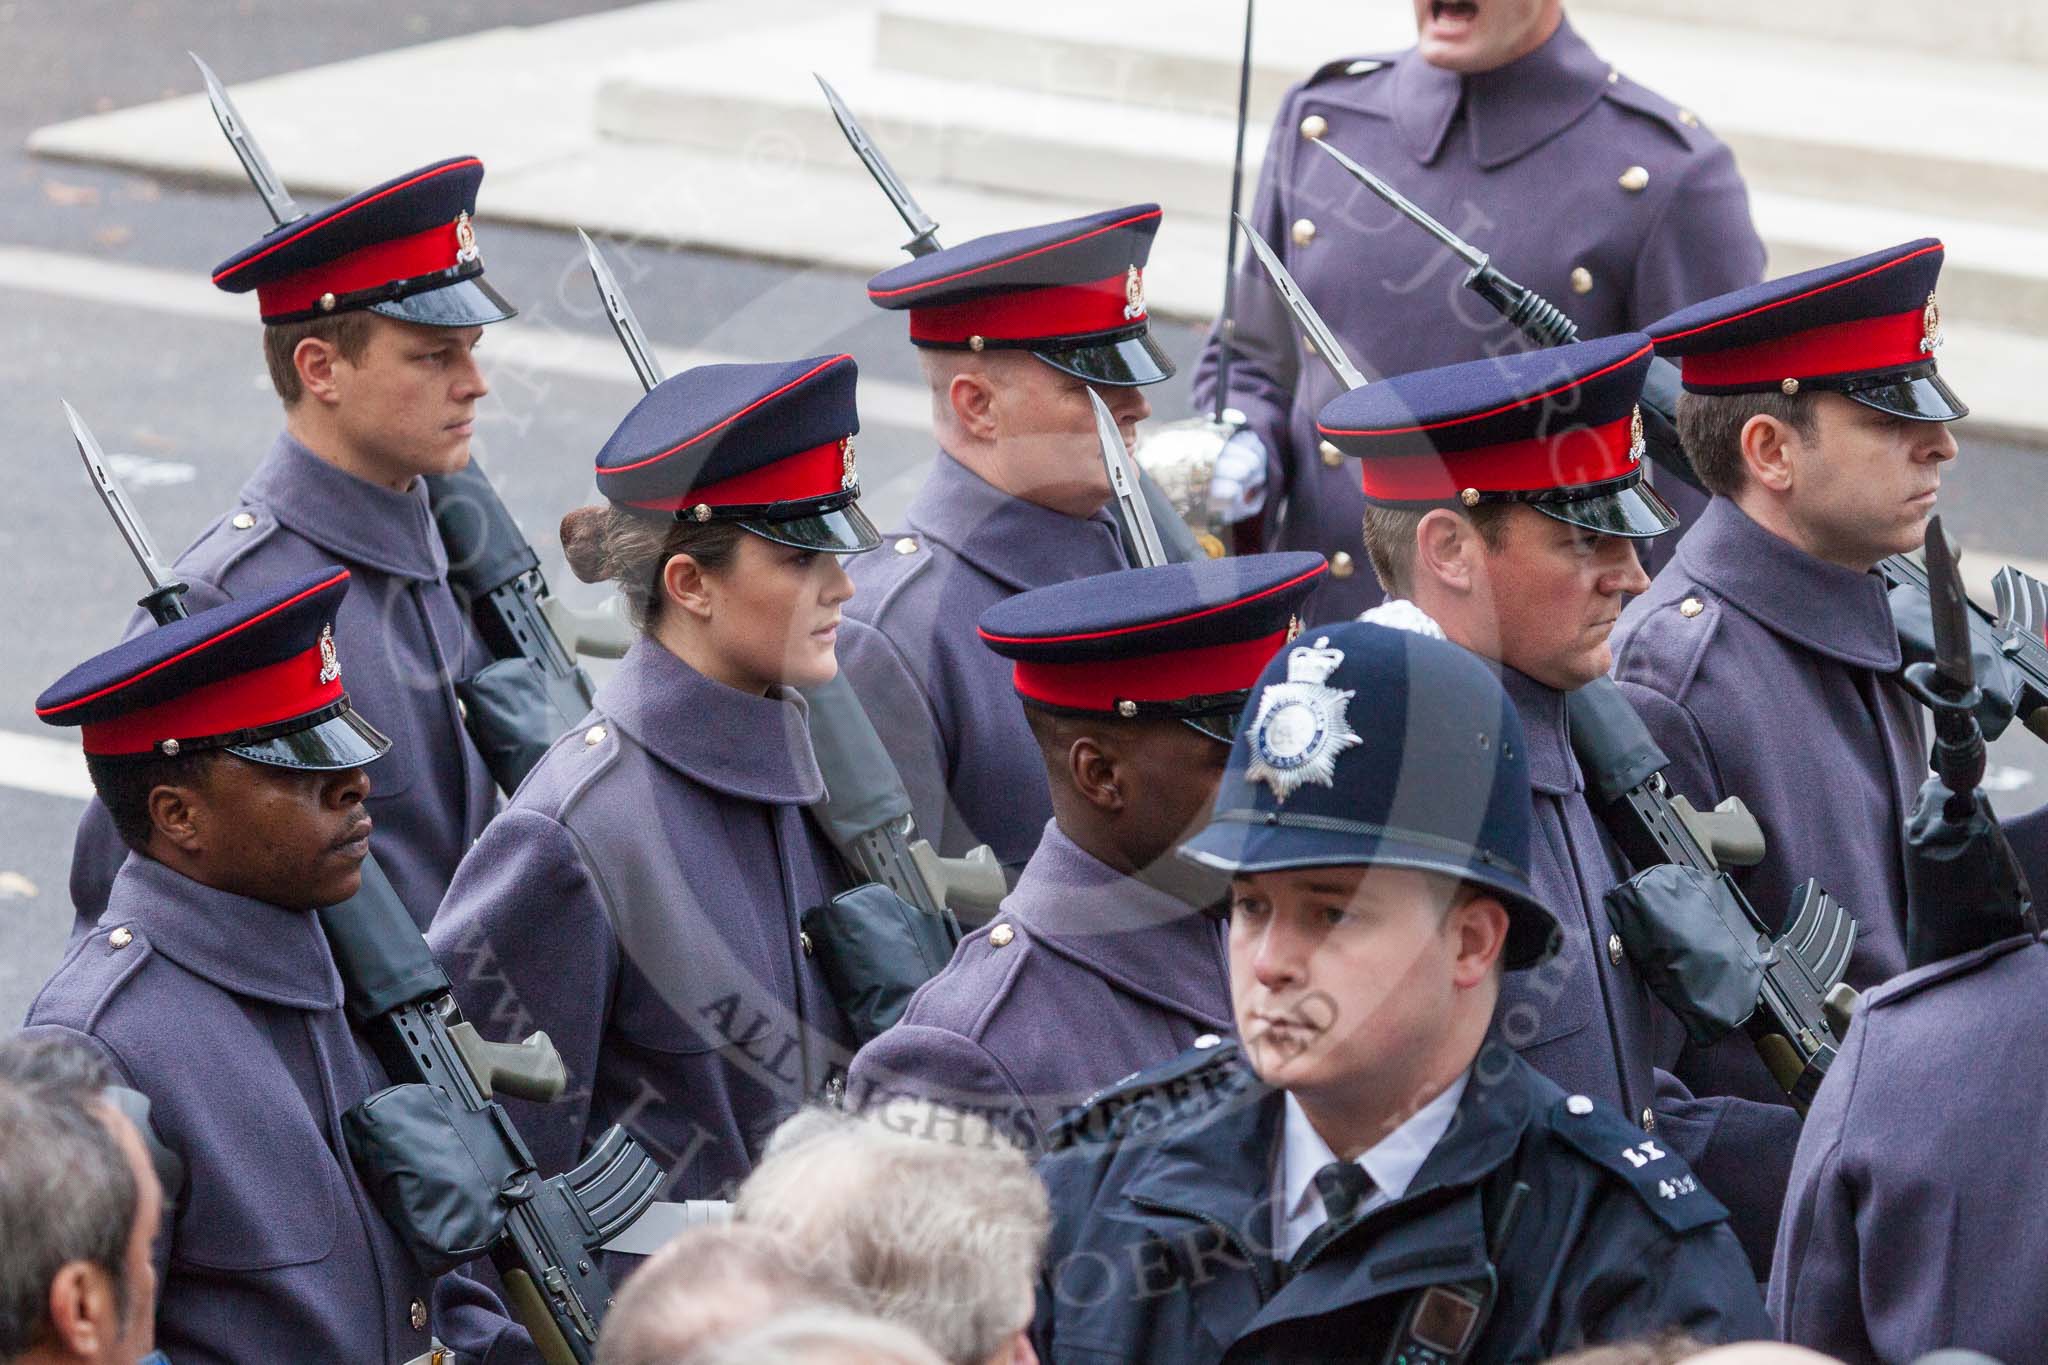 Remembrance Sunday at the Cenotaph 2015: The Royal Logistic Corps detachment marching to their position on the southern side of Whitehall. Image #55, 08 November 2015 10:30 Whitehall, London, UK